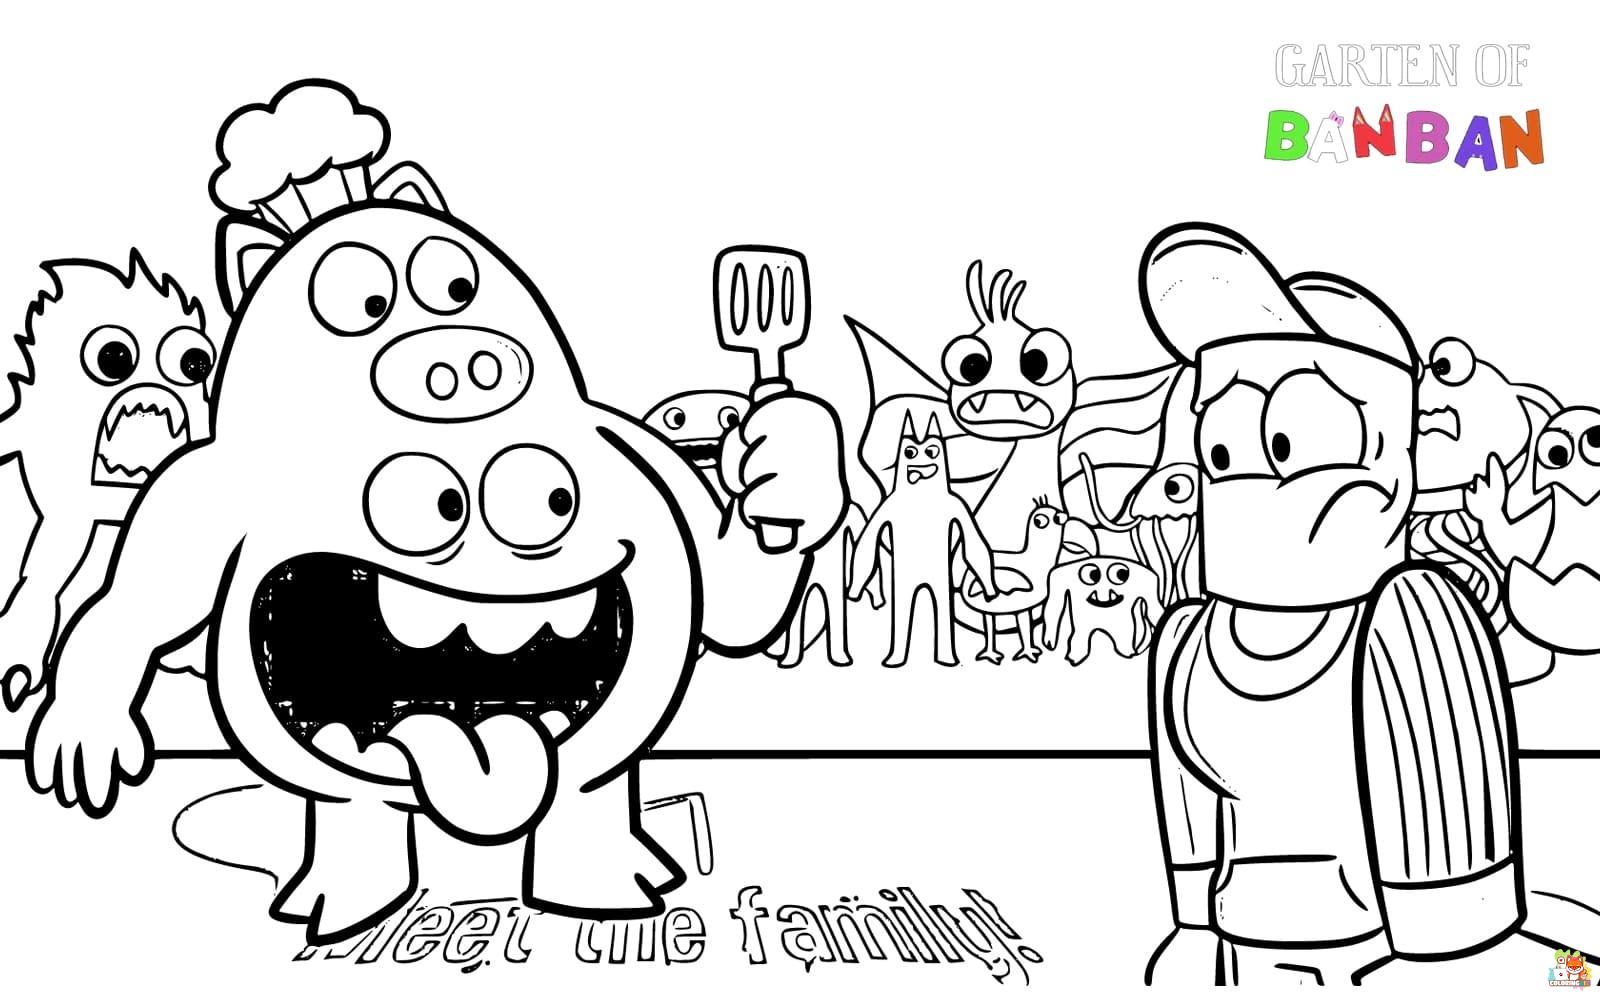 Garten of Banban Chapter 2 Coloring Pages 5